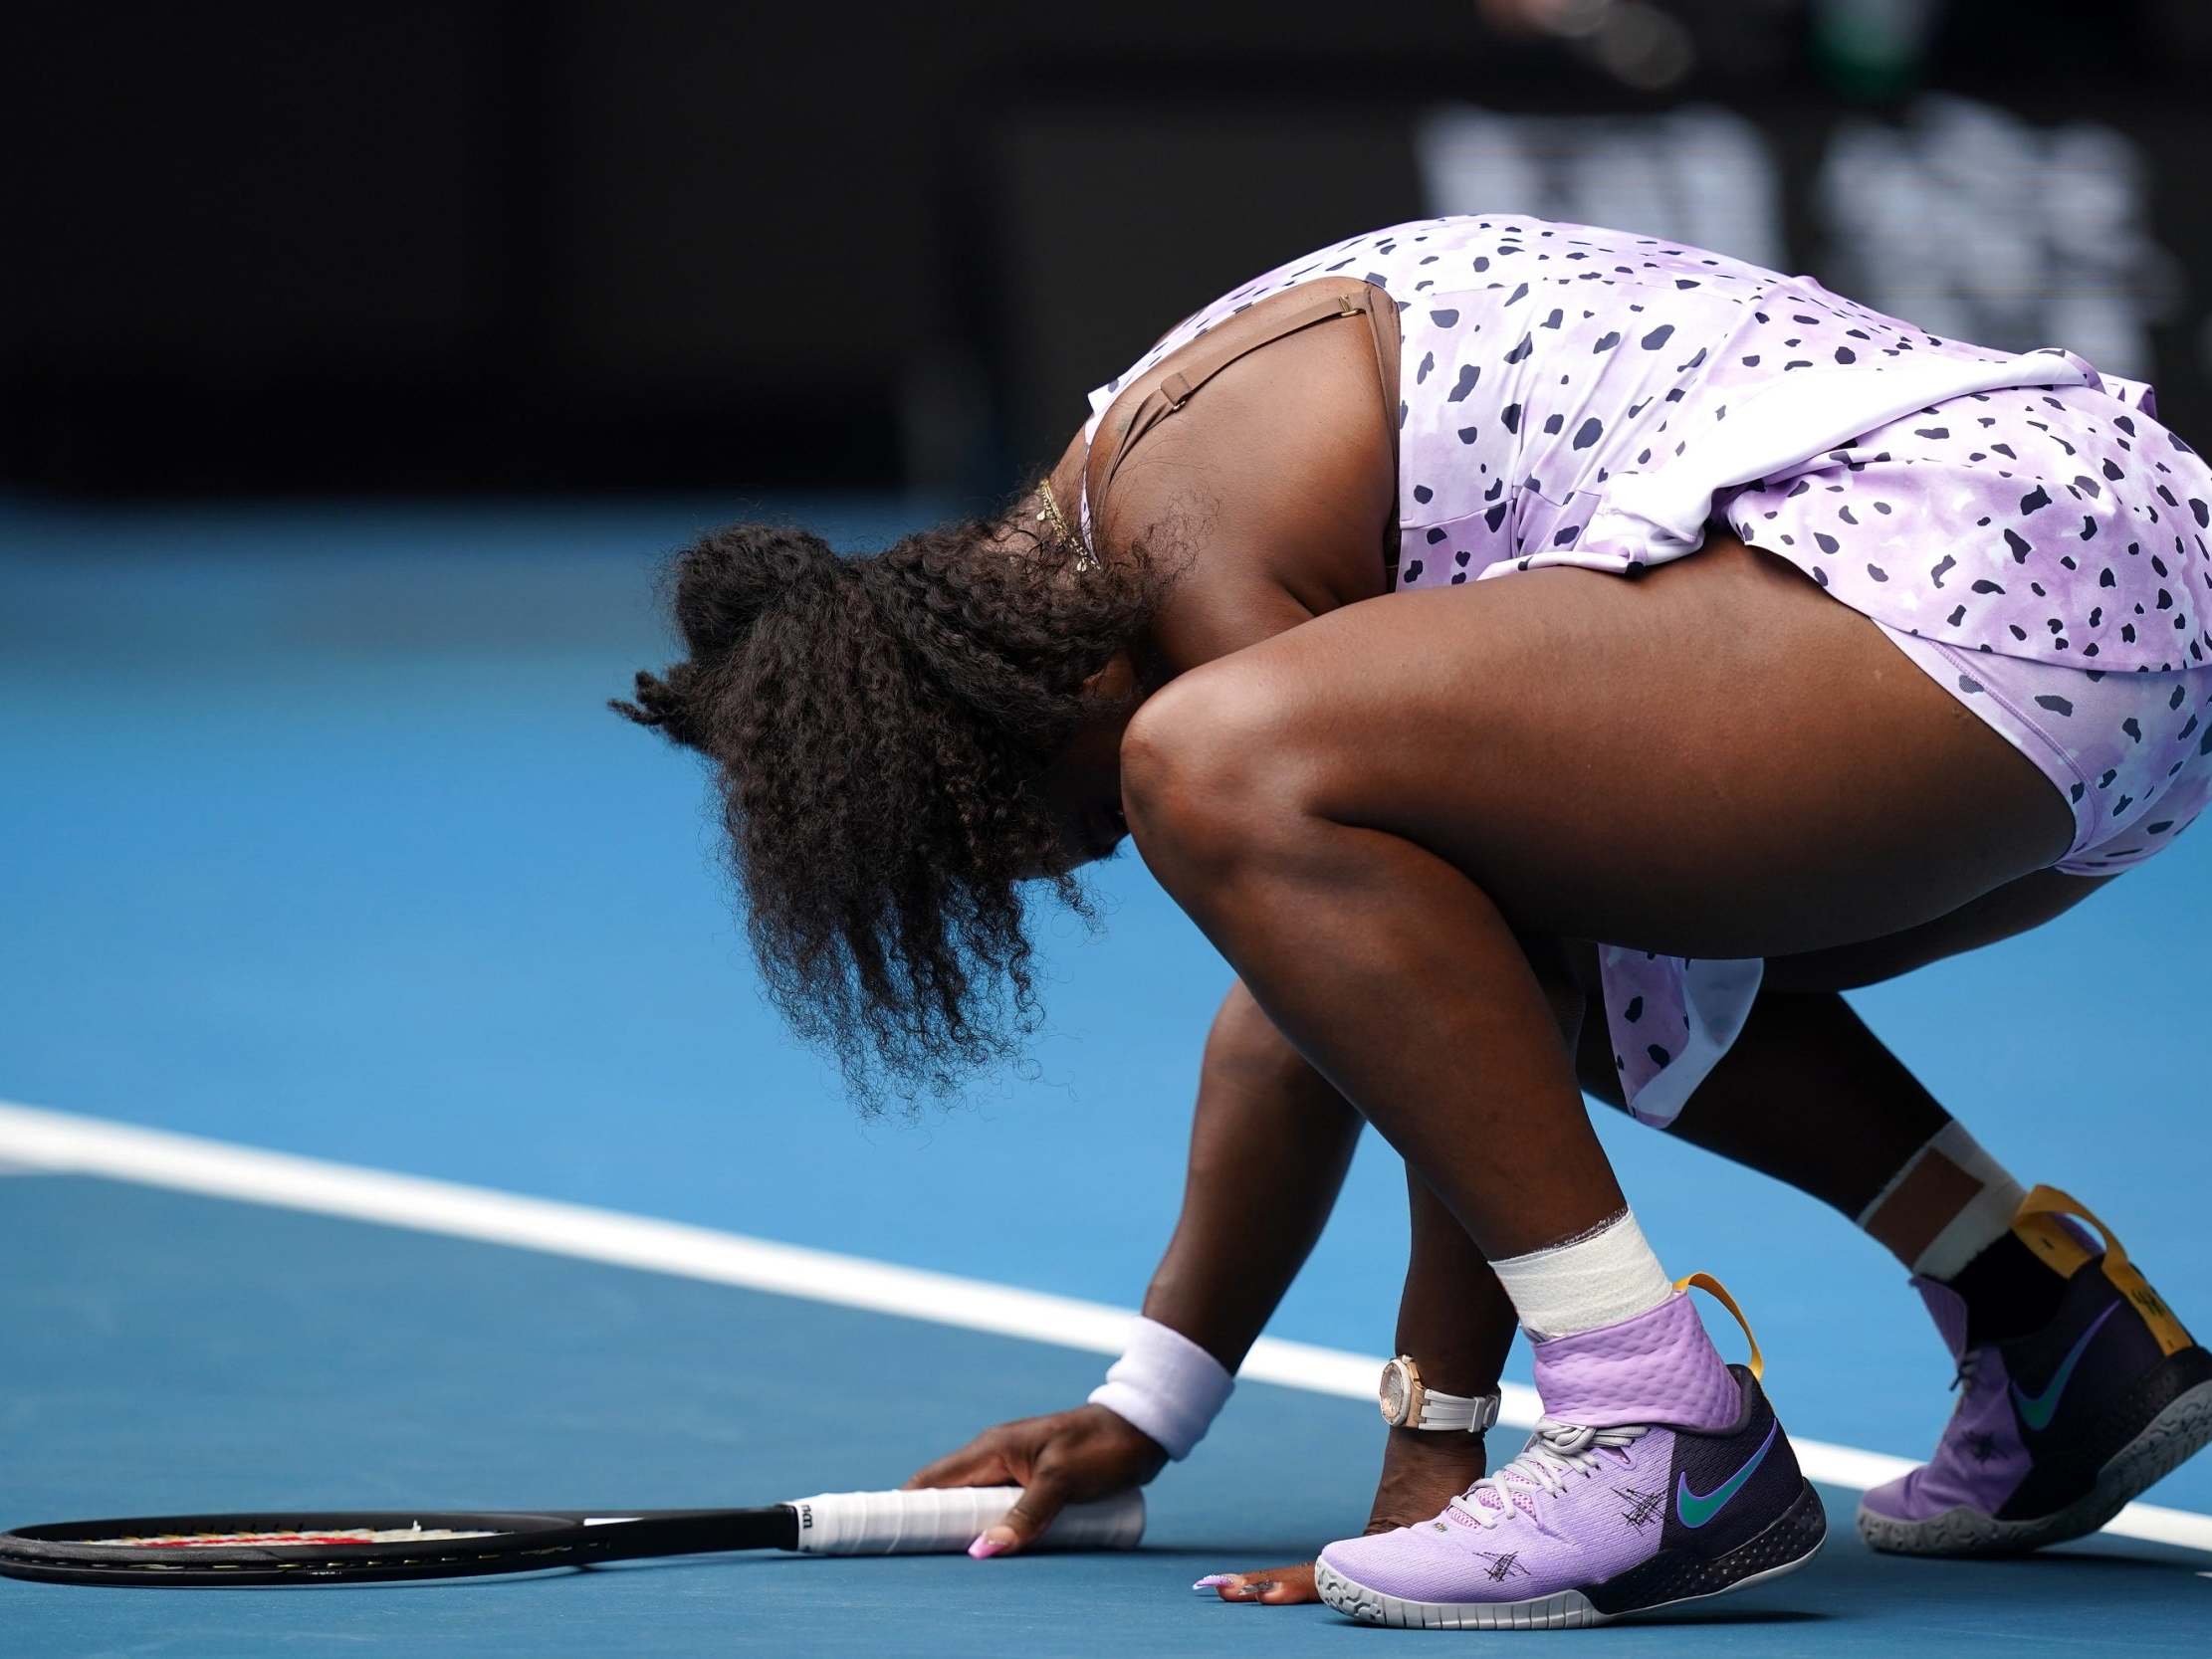 Williams crashed out of the tournament on Friday